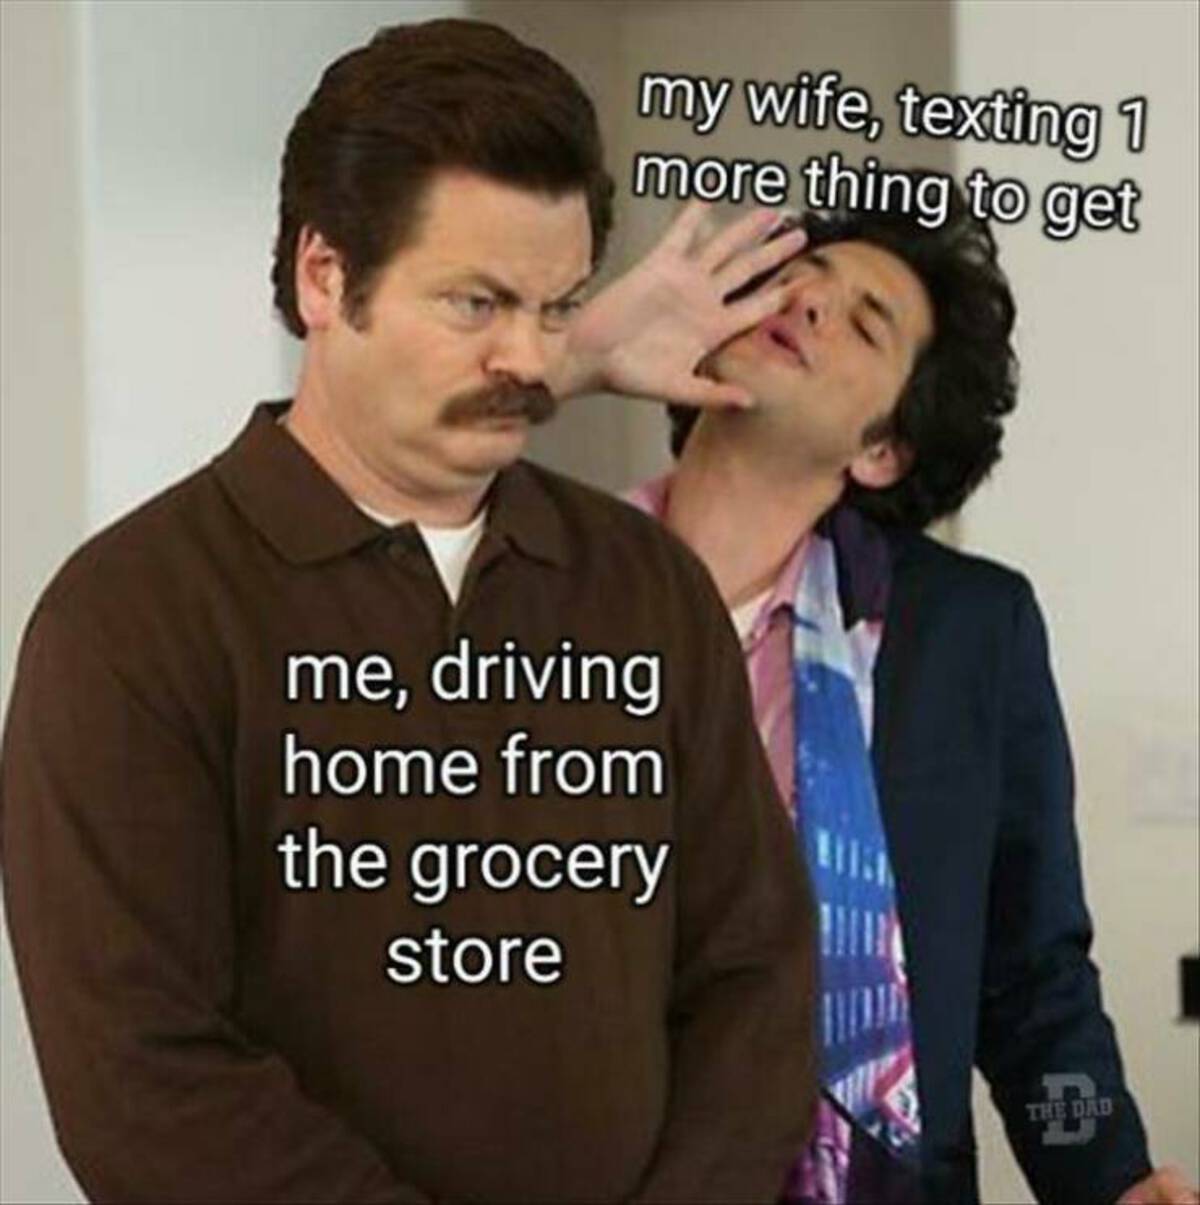 ron swanson jean ralphio meme - my wife, texting 1 more thing to get me, driving home from the grocery store The Dad